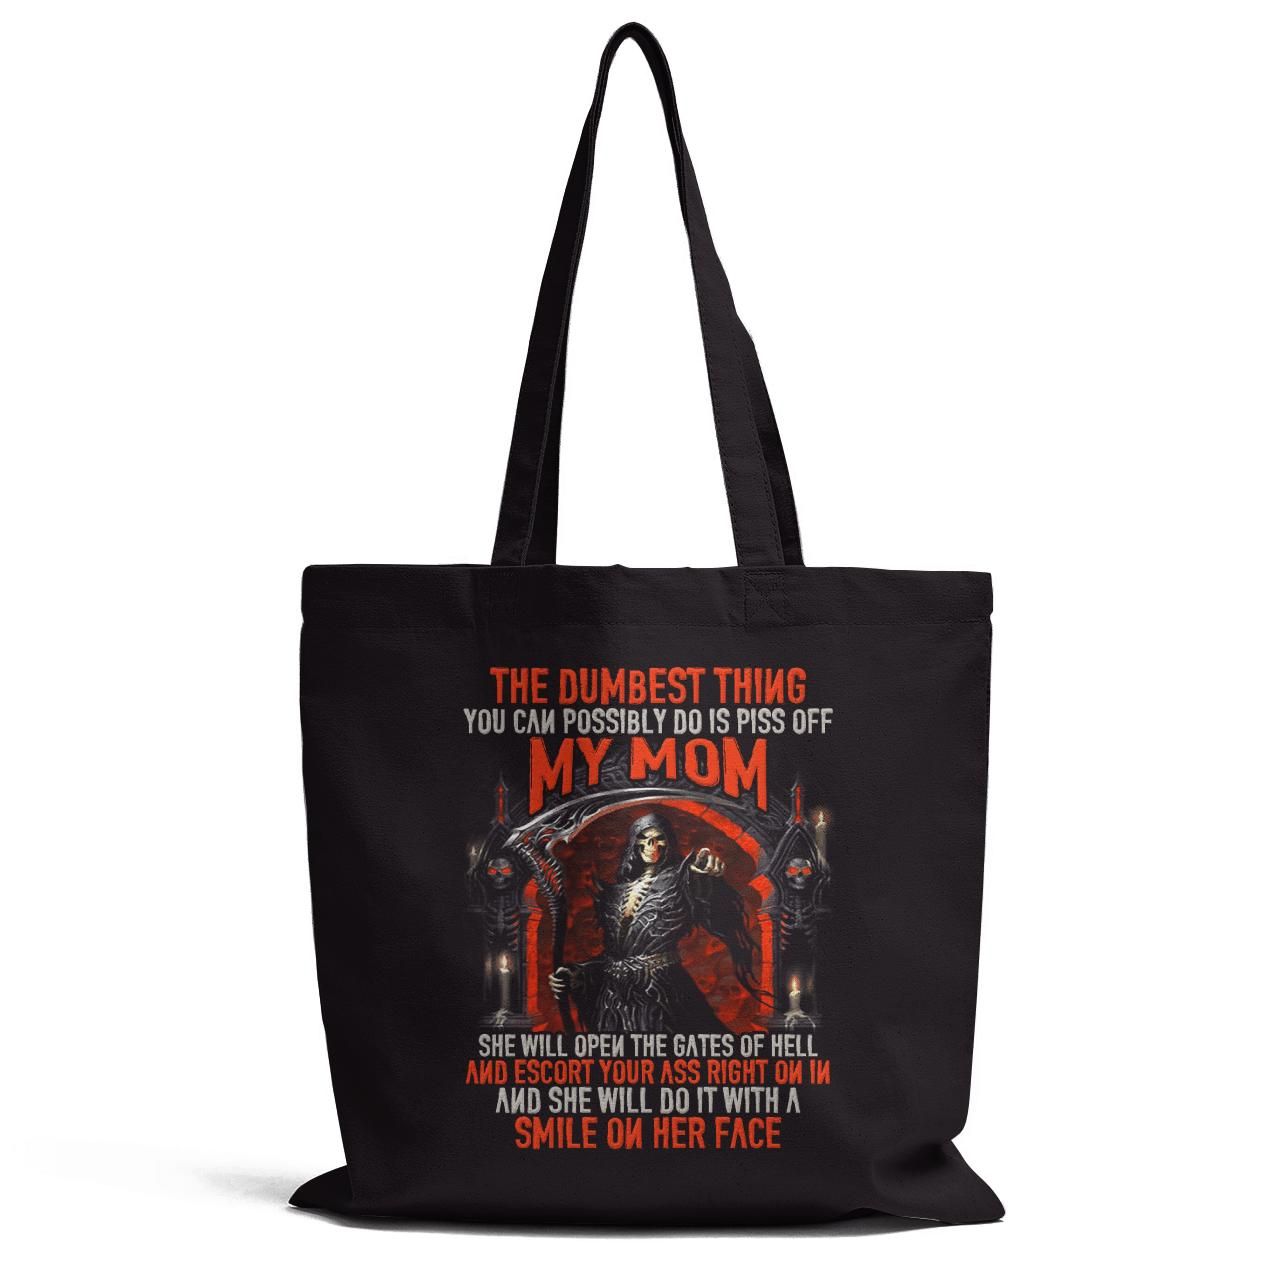 My Mom She Will Open The Gates Of Hell Tote Bag